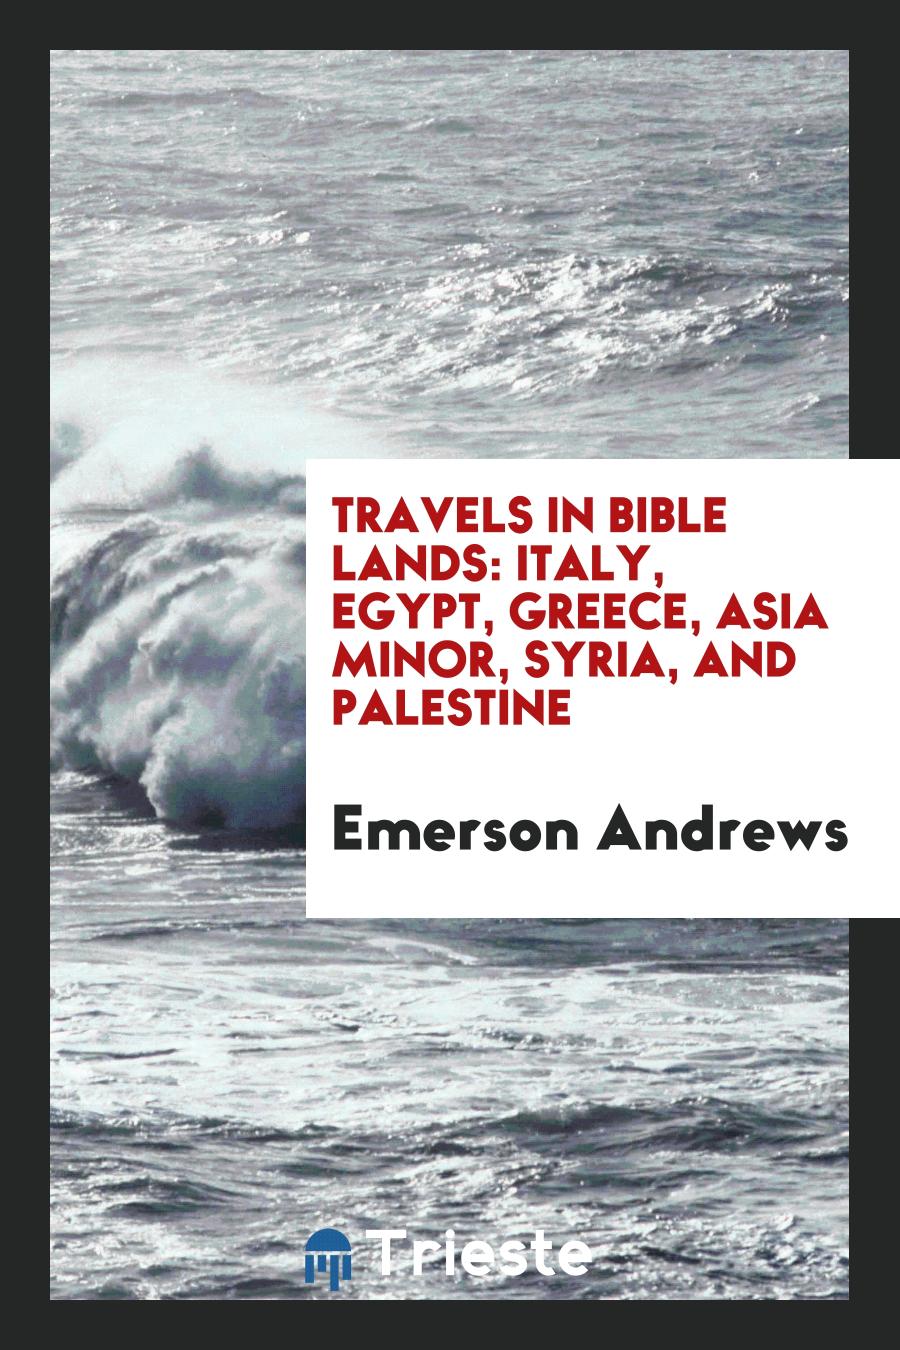 Travels in Bible lands: Italy, Egypt, Greece, Asia Minor, Syria, and Palestine